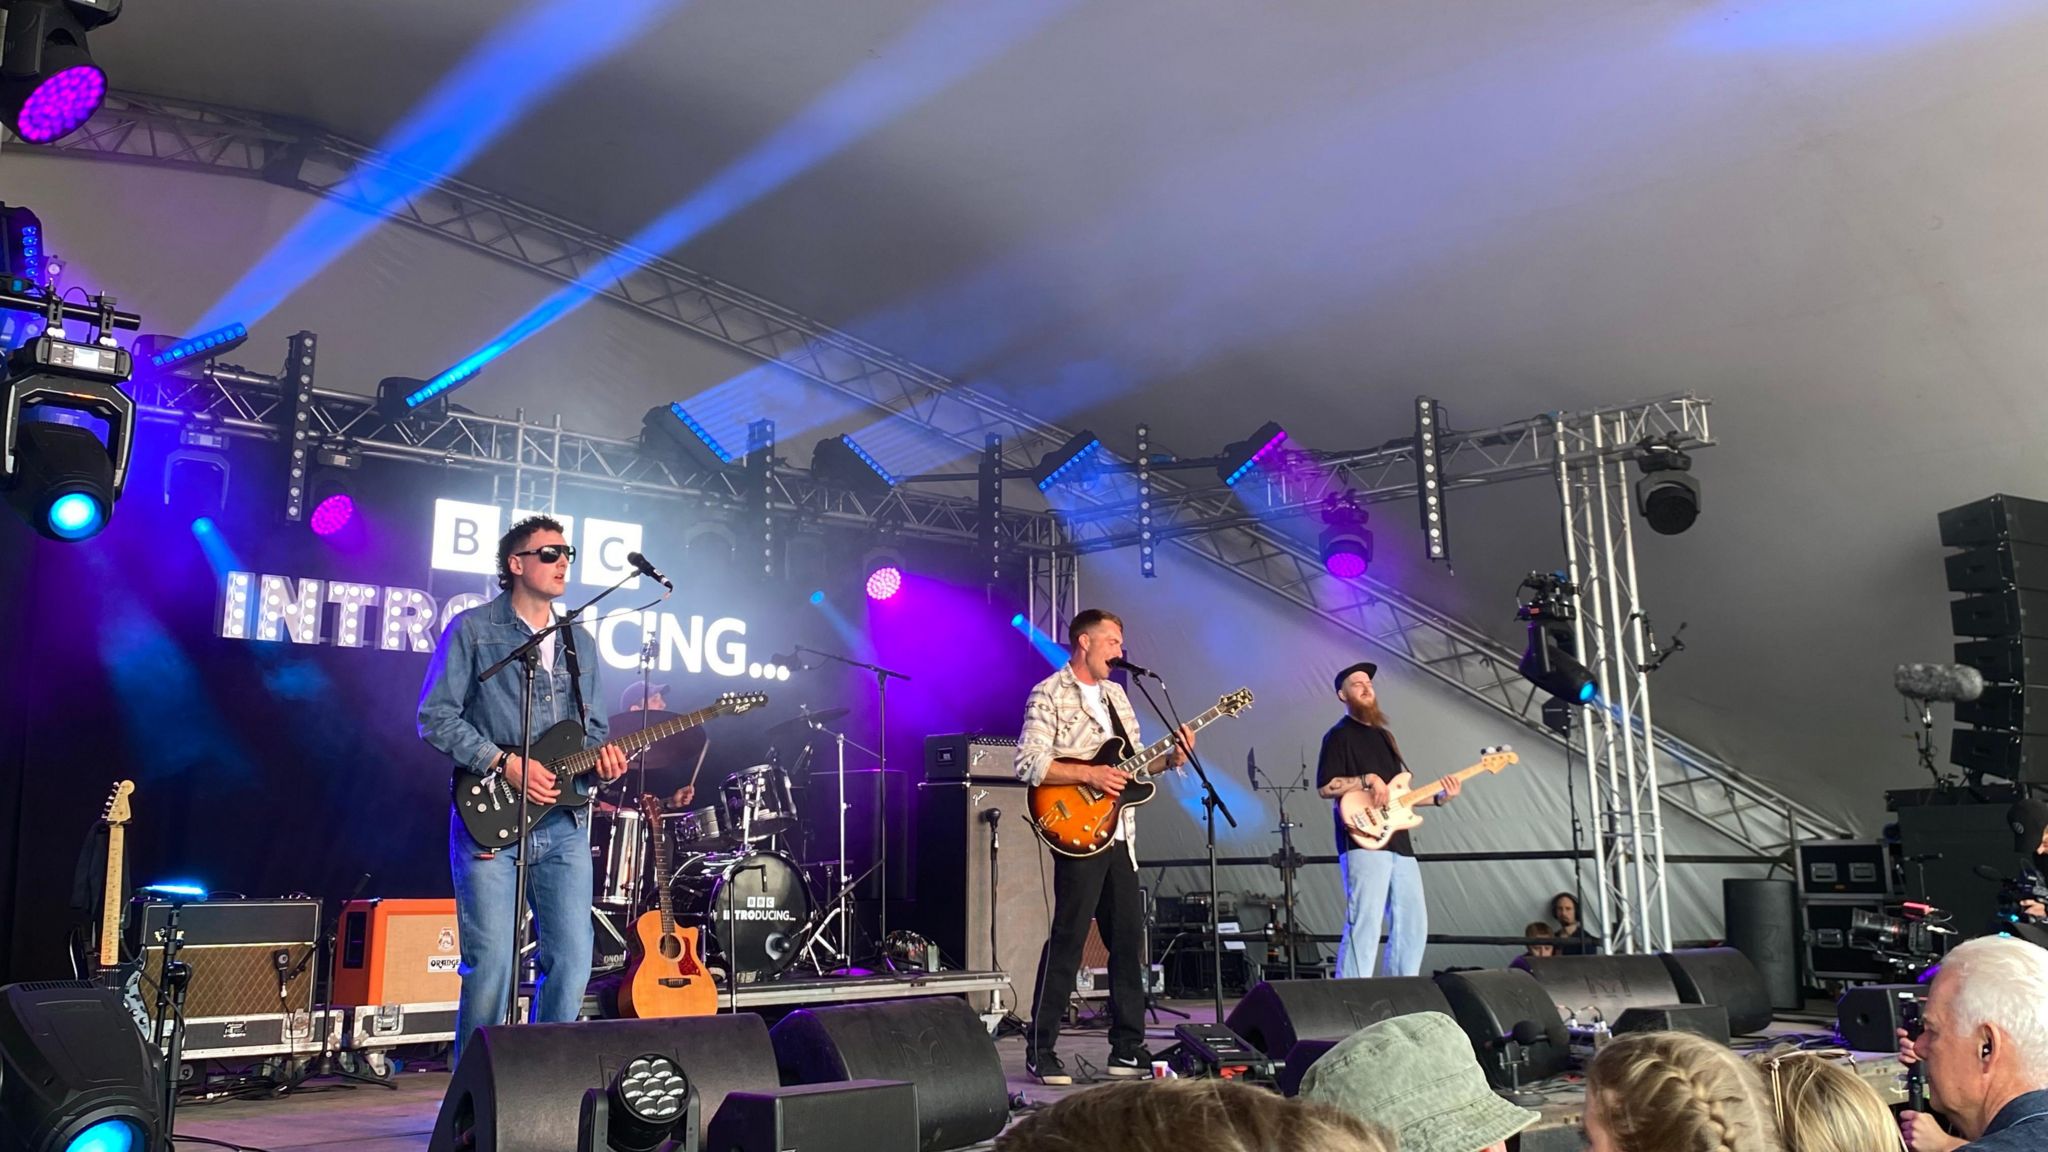 Sam Evans and his band performing on the BBC Introducing stage with the logo lit up behind them and a crowd watching near the front